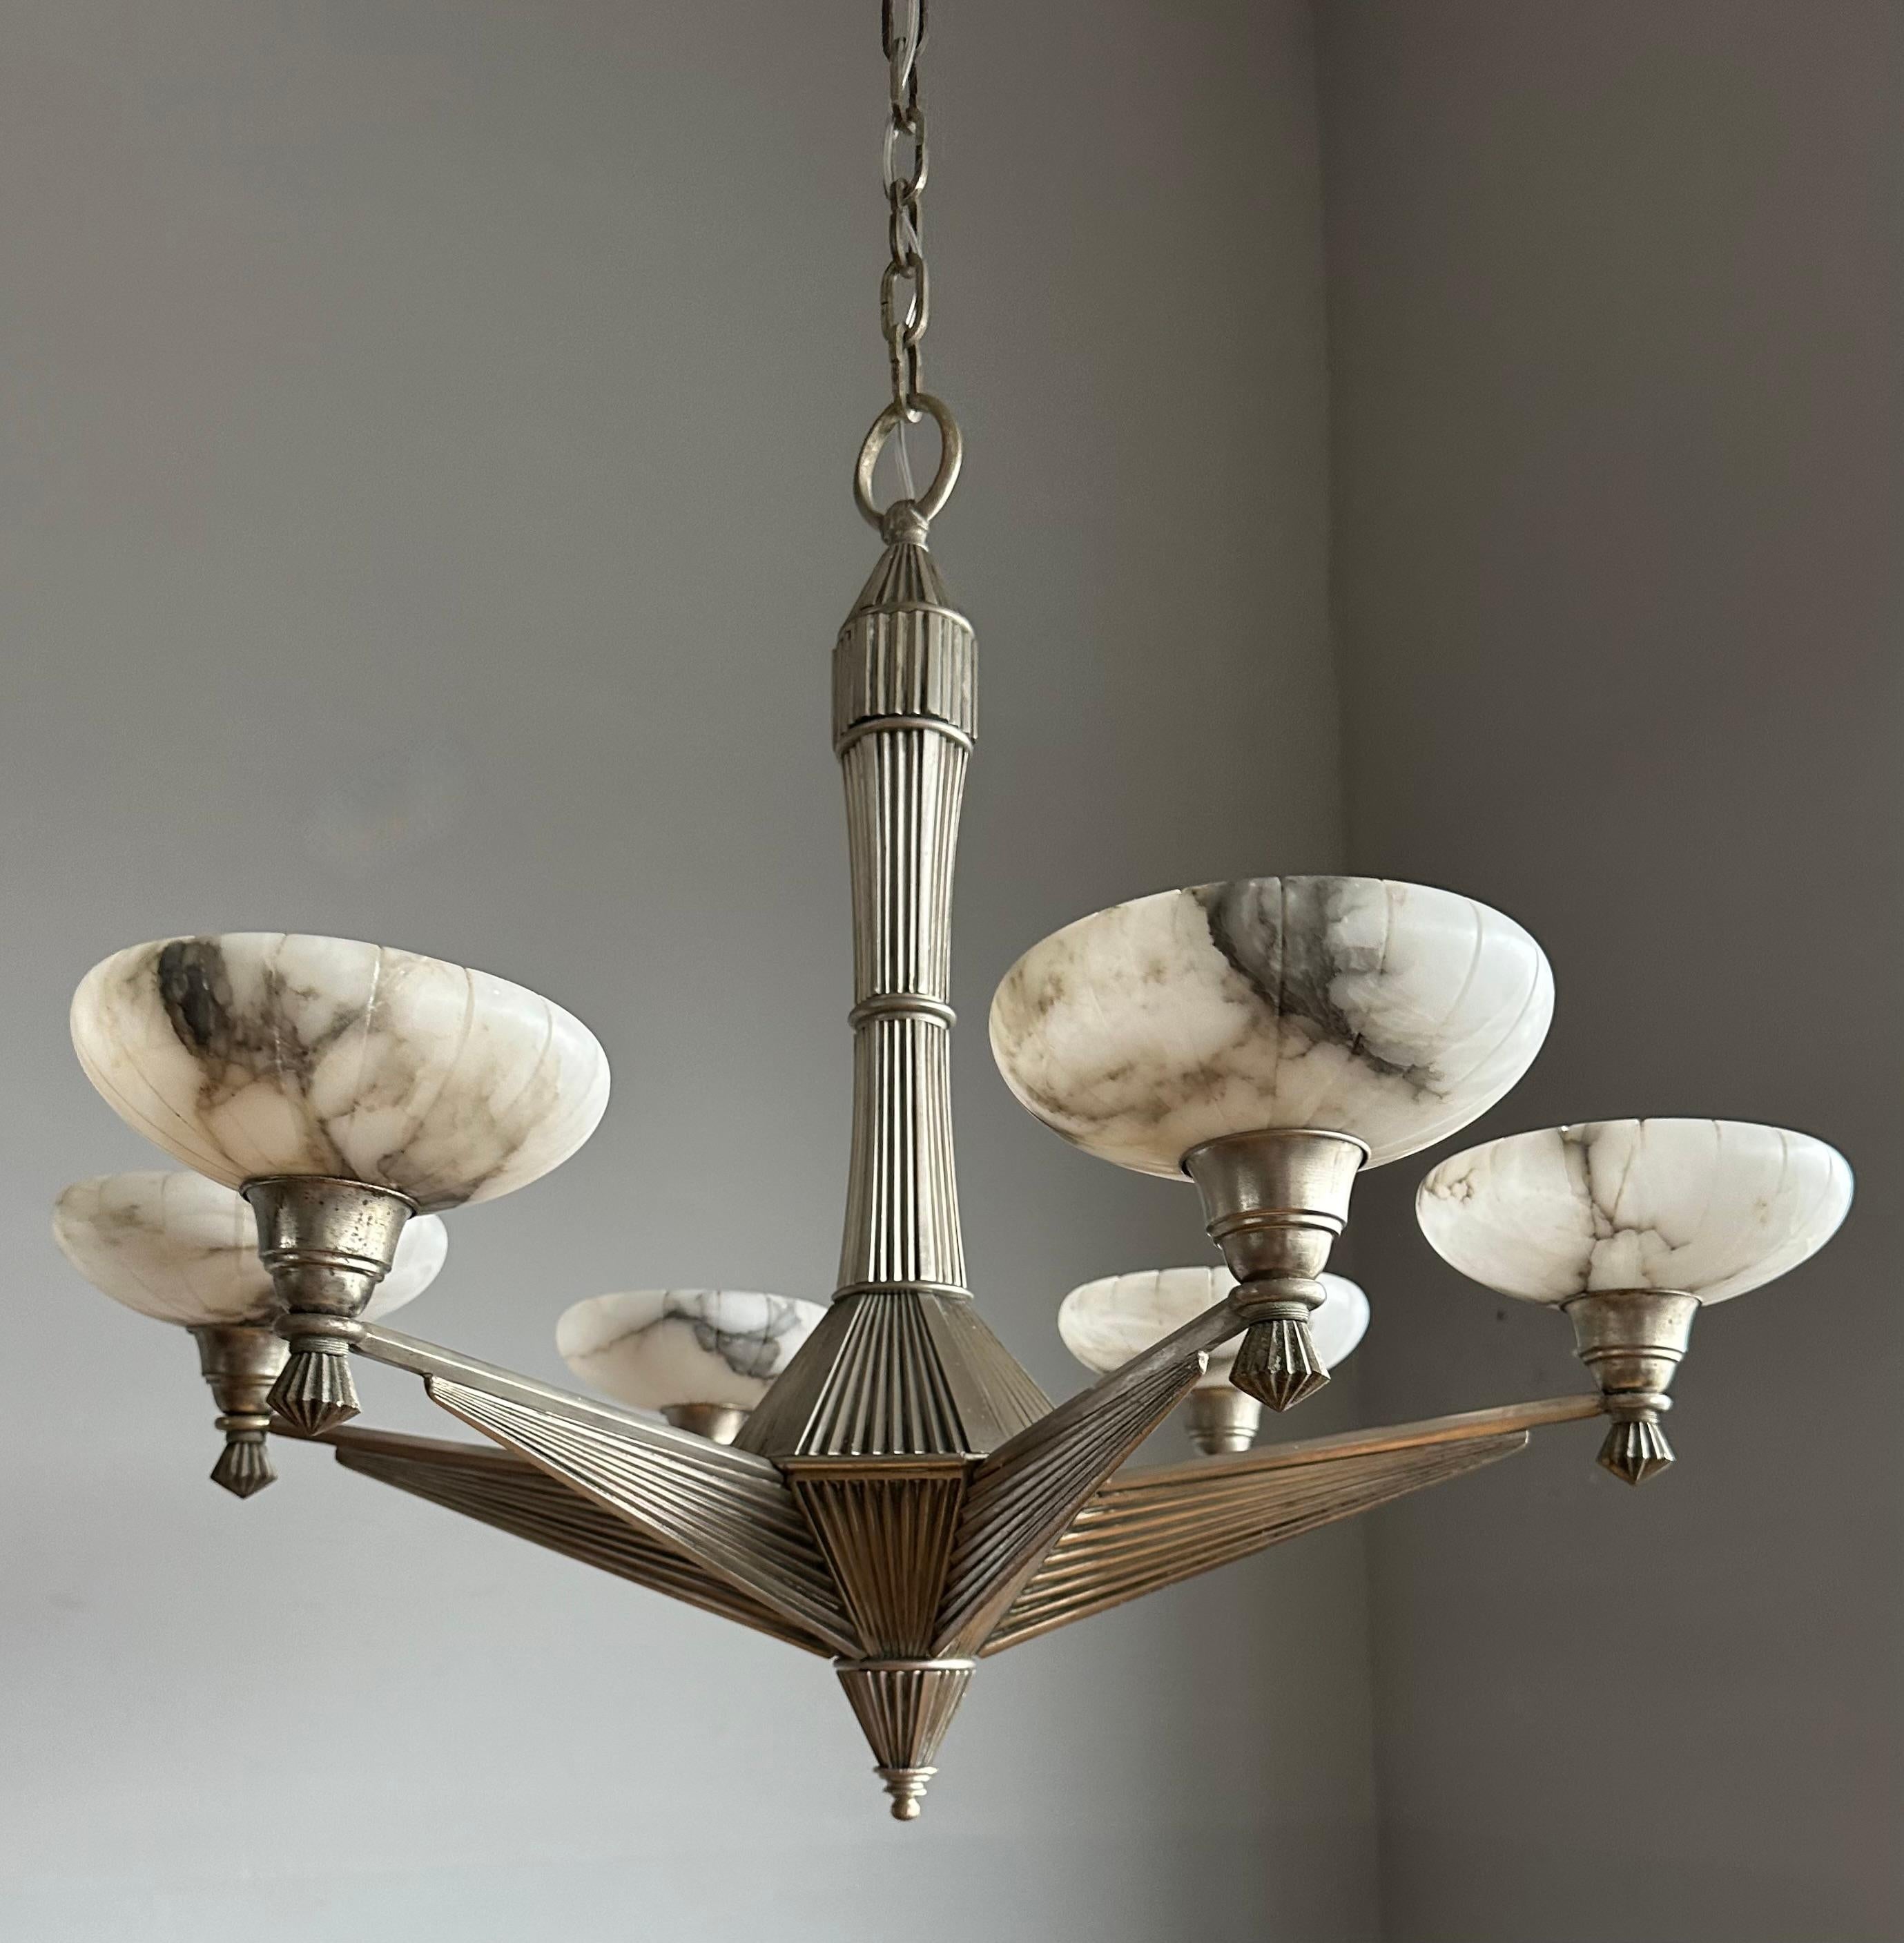 Top Art Deco Design Silvered Bronze and Six Alabaster Shades Chandelier, 1920 For Sale 4